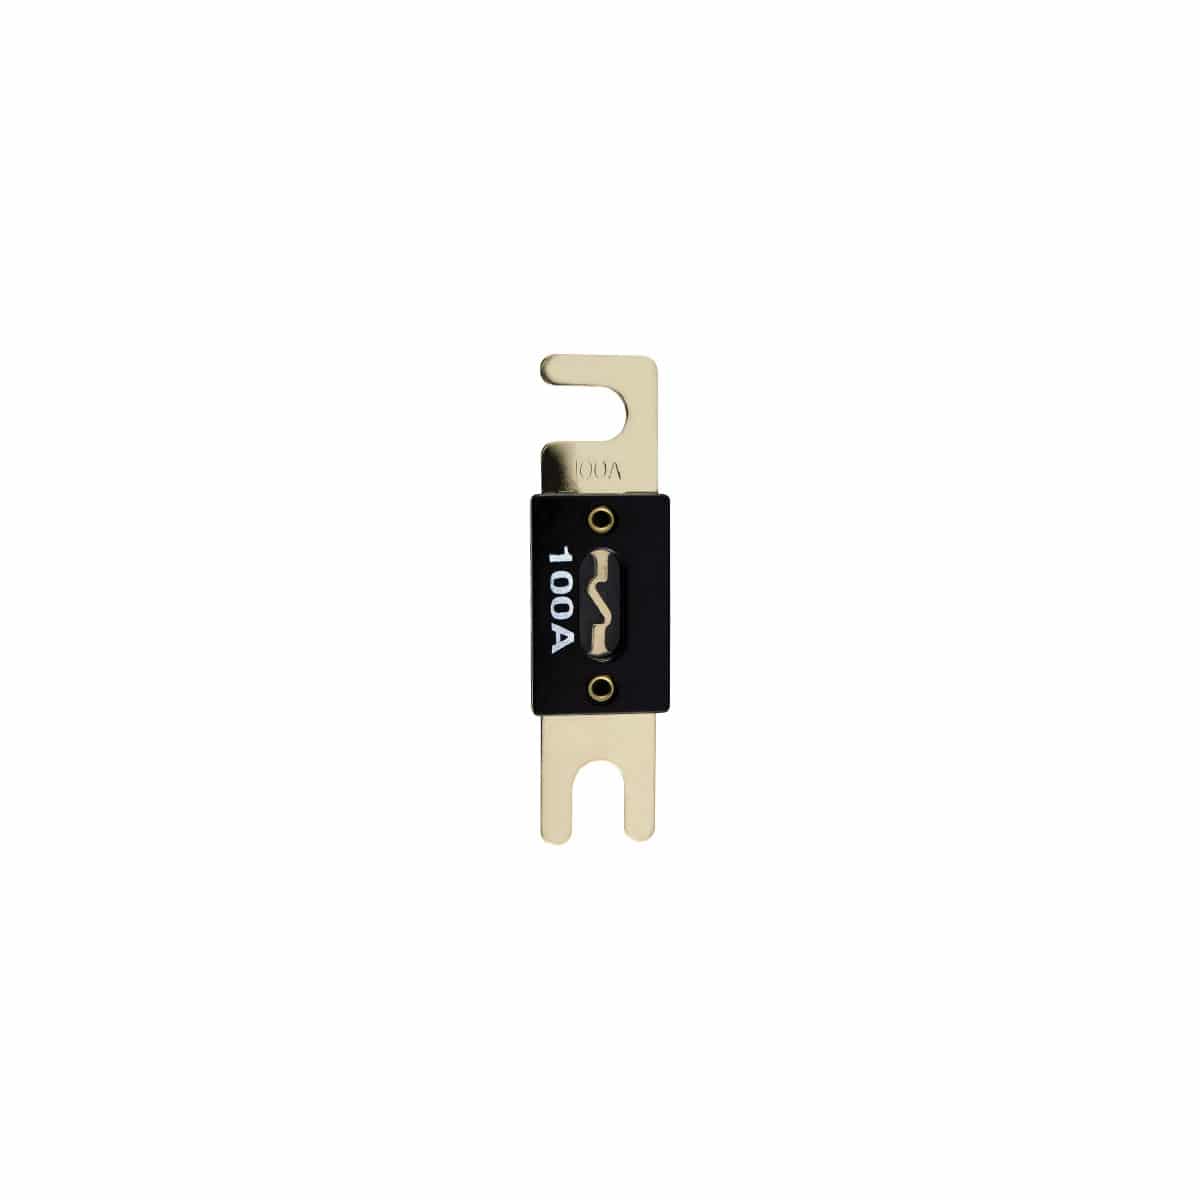 DB Link Gold-Plated ANL 500 Amp Fuse, Gold Finish 1 Fuse Per Package ANL500